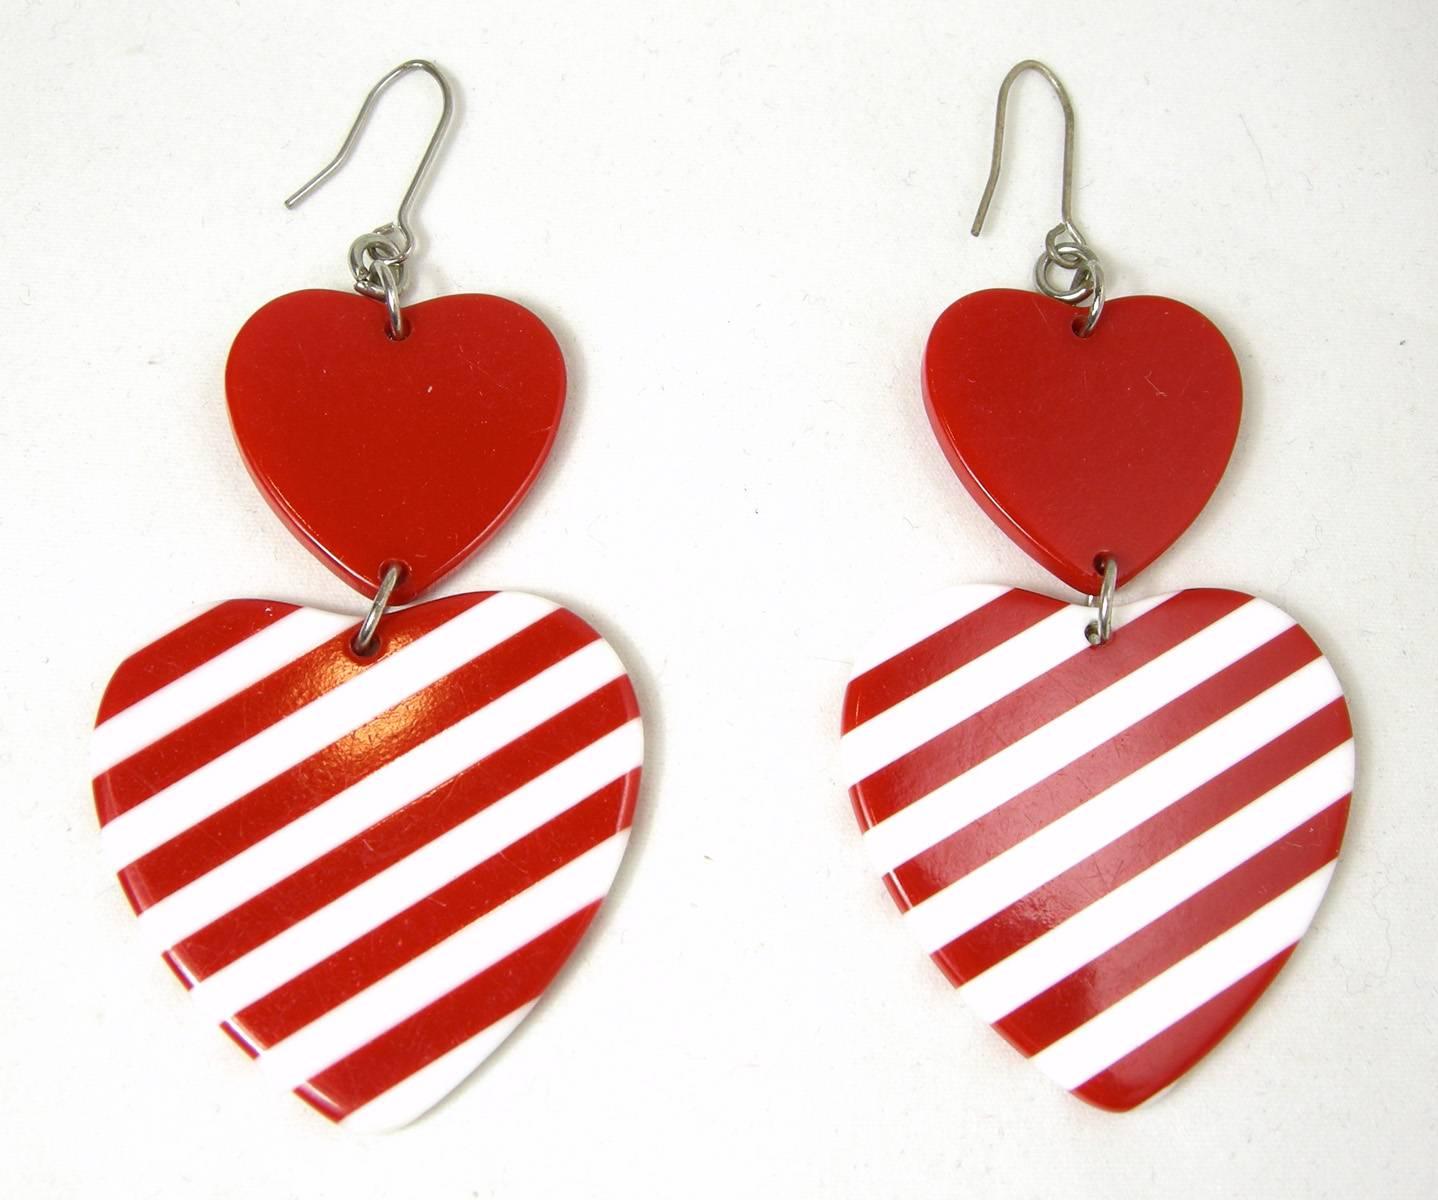 Here are pierced earrings to wear any time you just want to have fun.  The top has the pierced hoop connected to a red enamel heart, which then connects to a larger heart with stripes that looks like a candy cane to me. They measure 2-1/2” long x